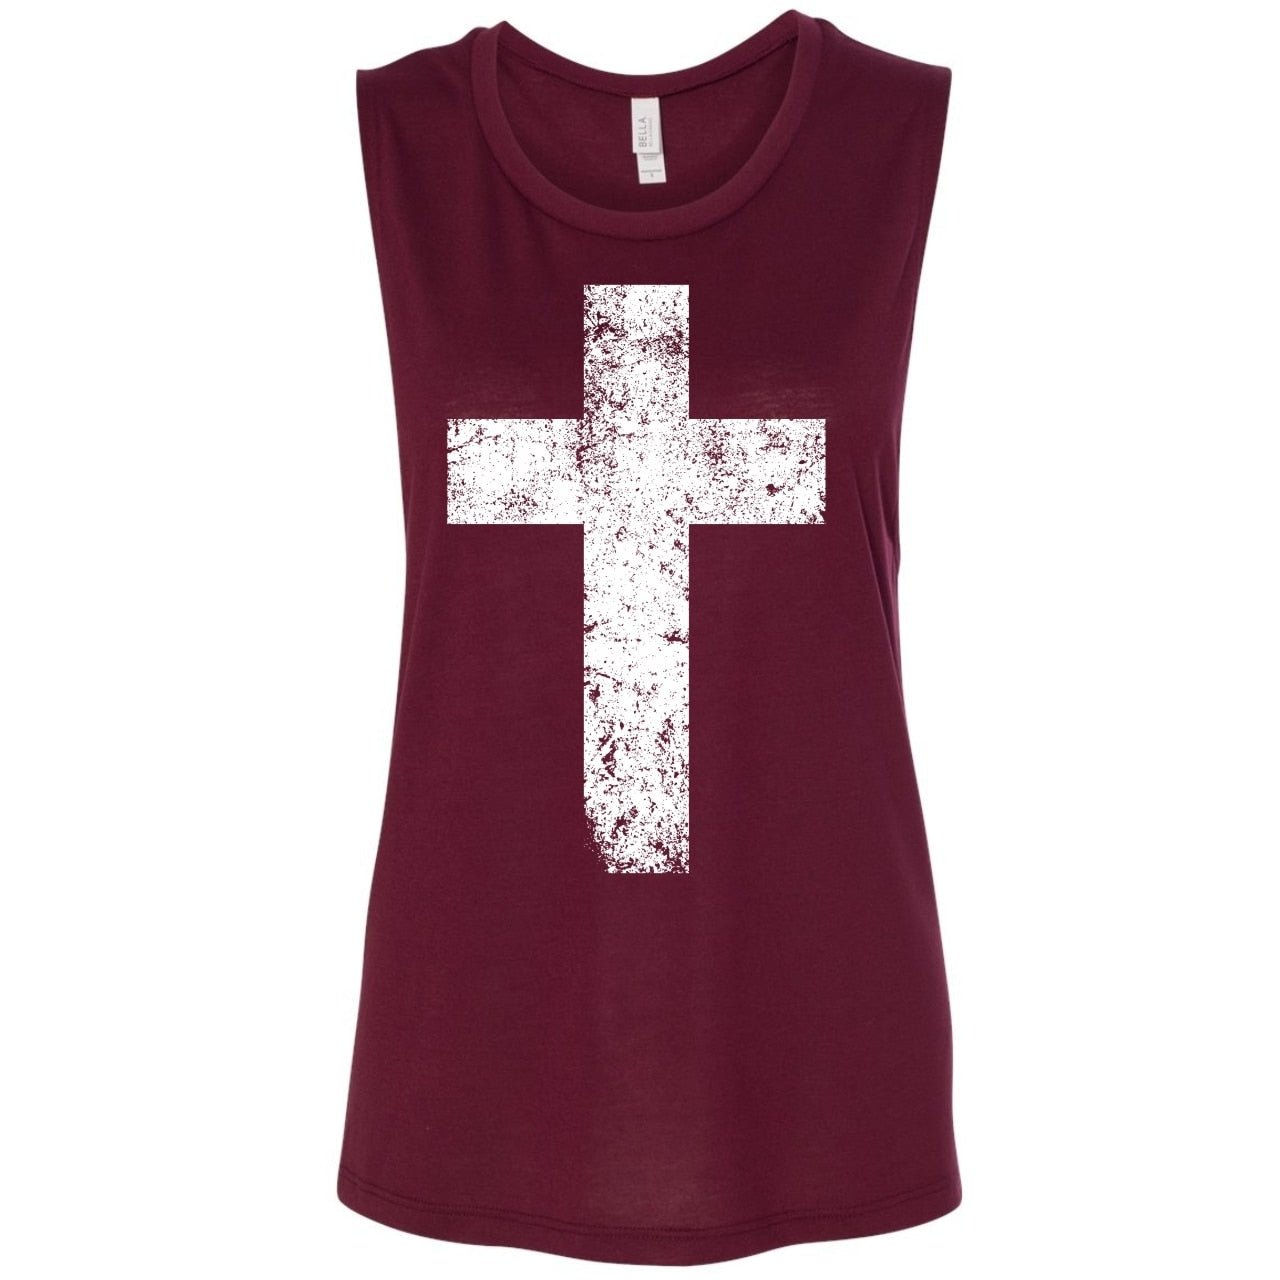 Cross - Ladies Flowy Tank with White Print - The Graphic Tee